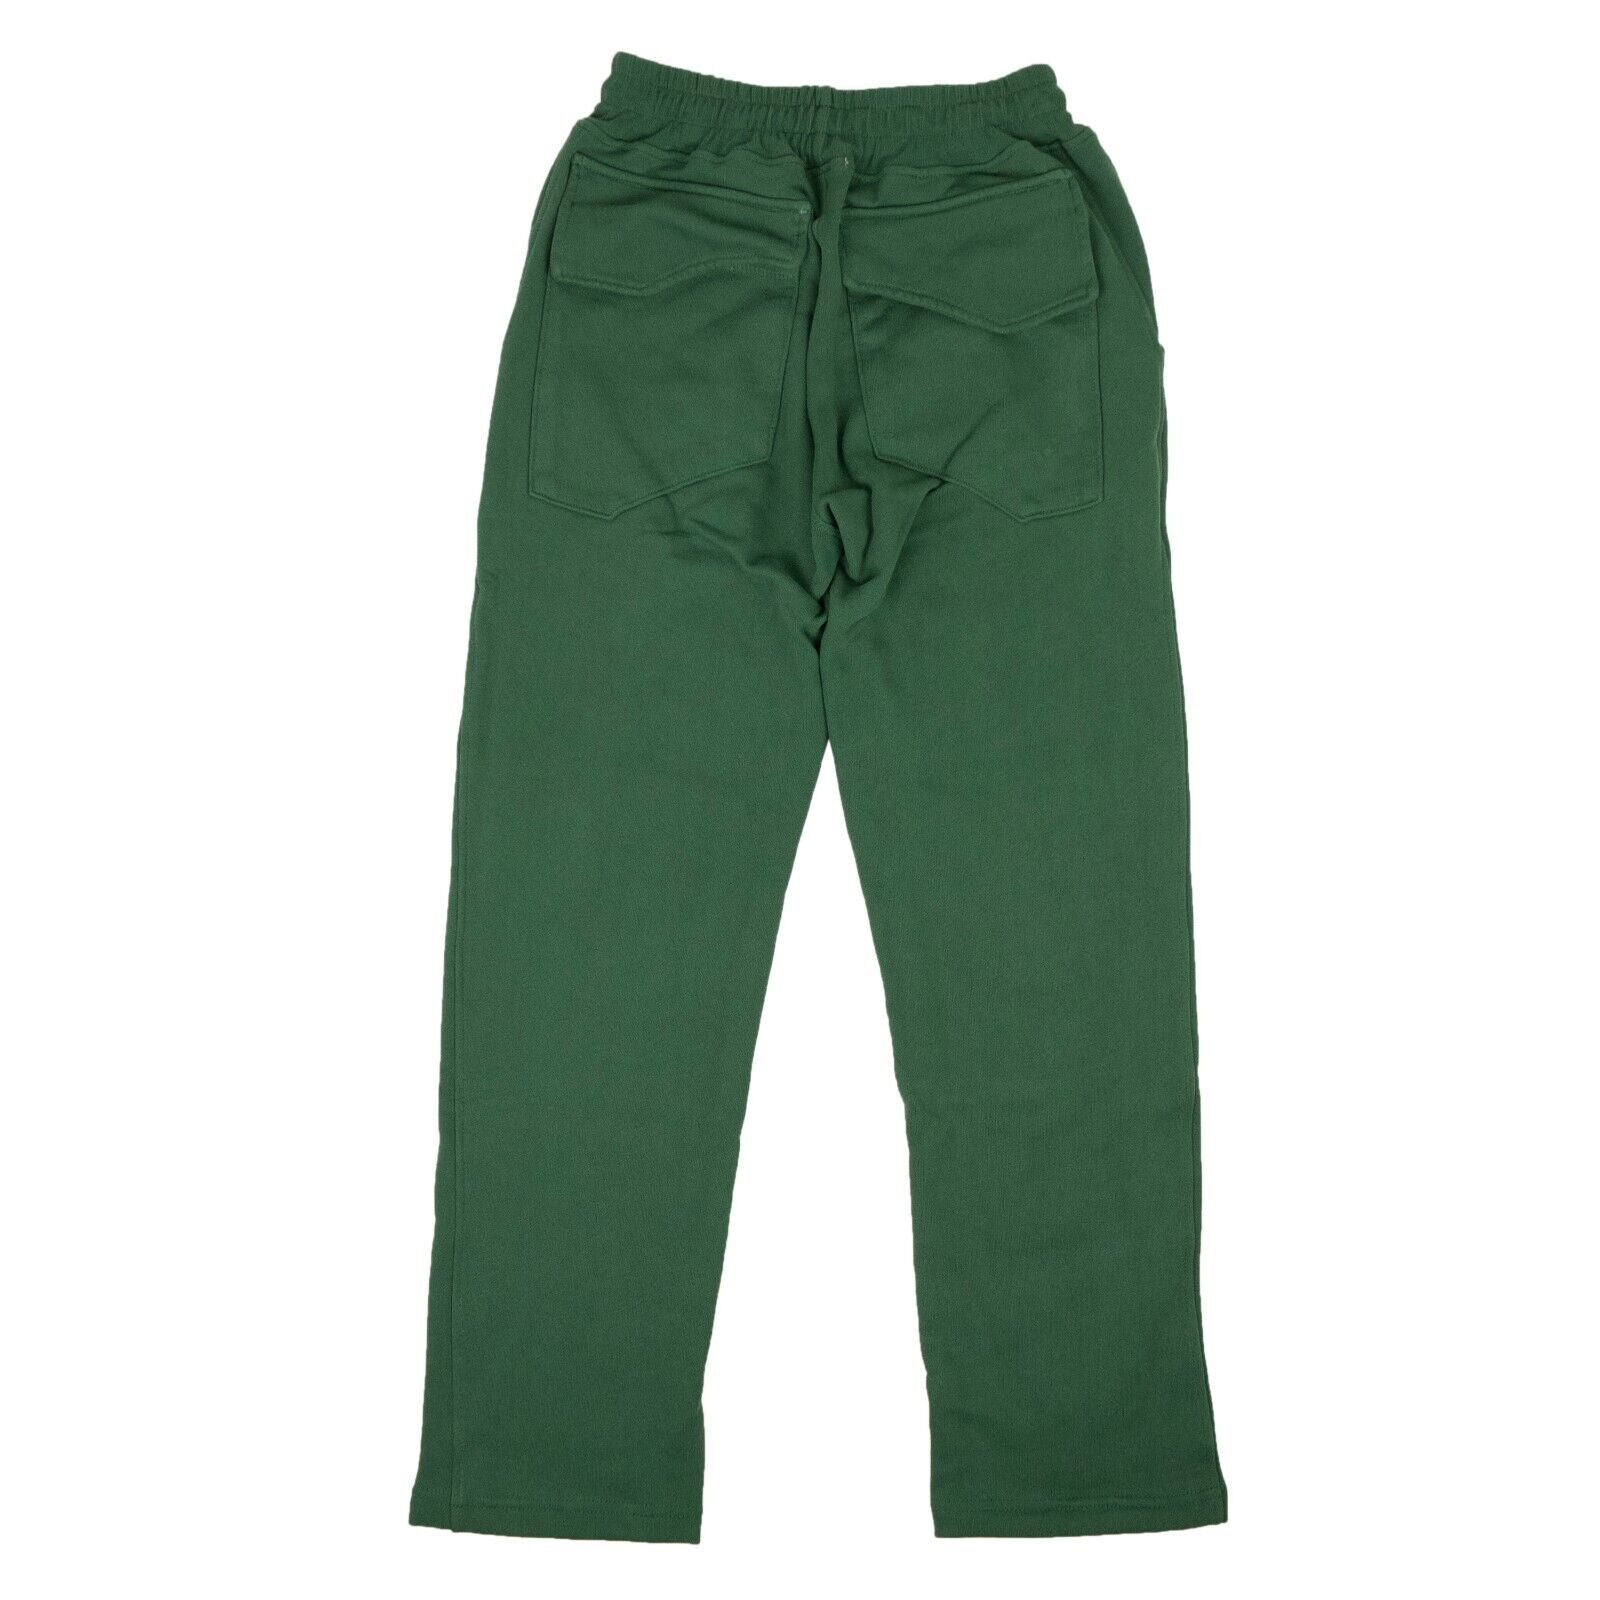 Rhude Forest Green Cotton Chenile Patch Sweatpants